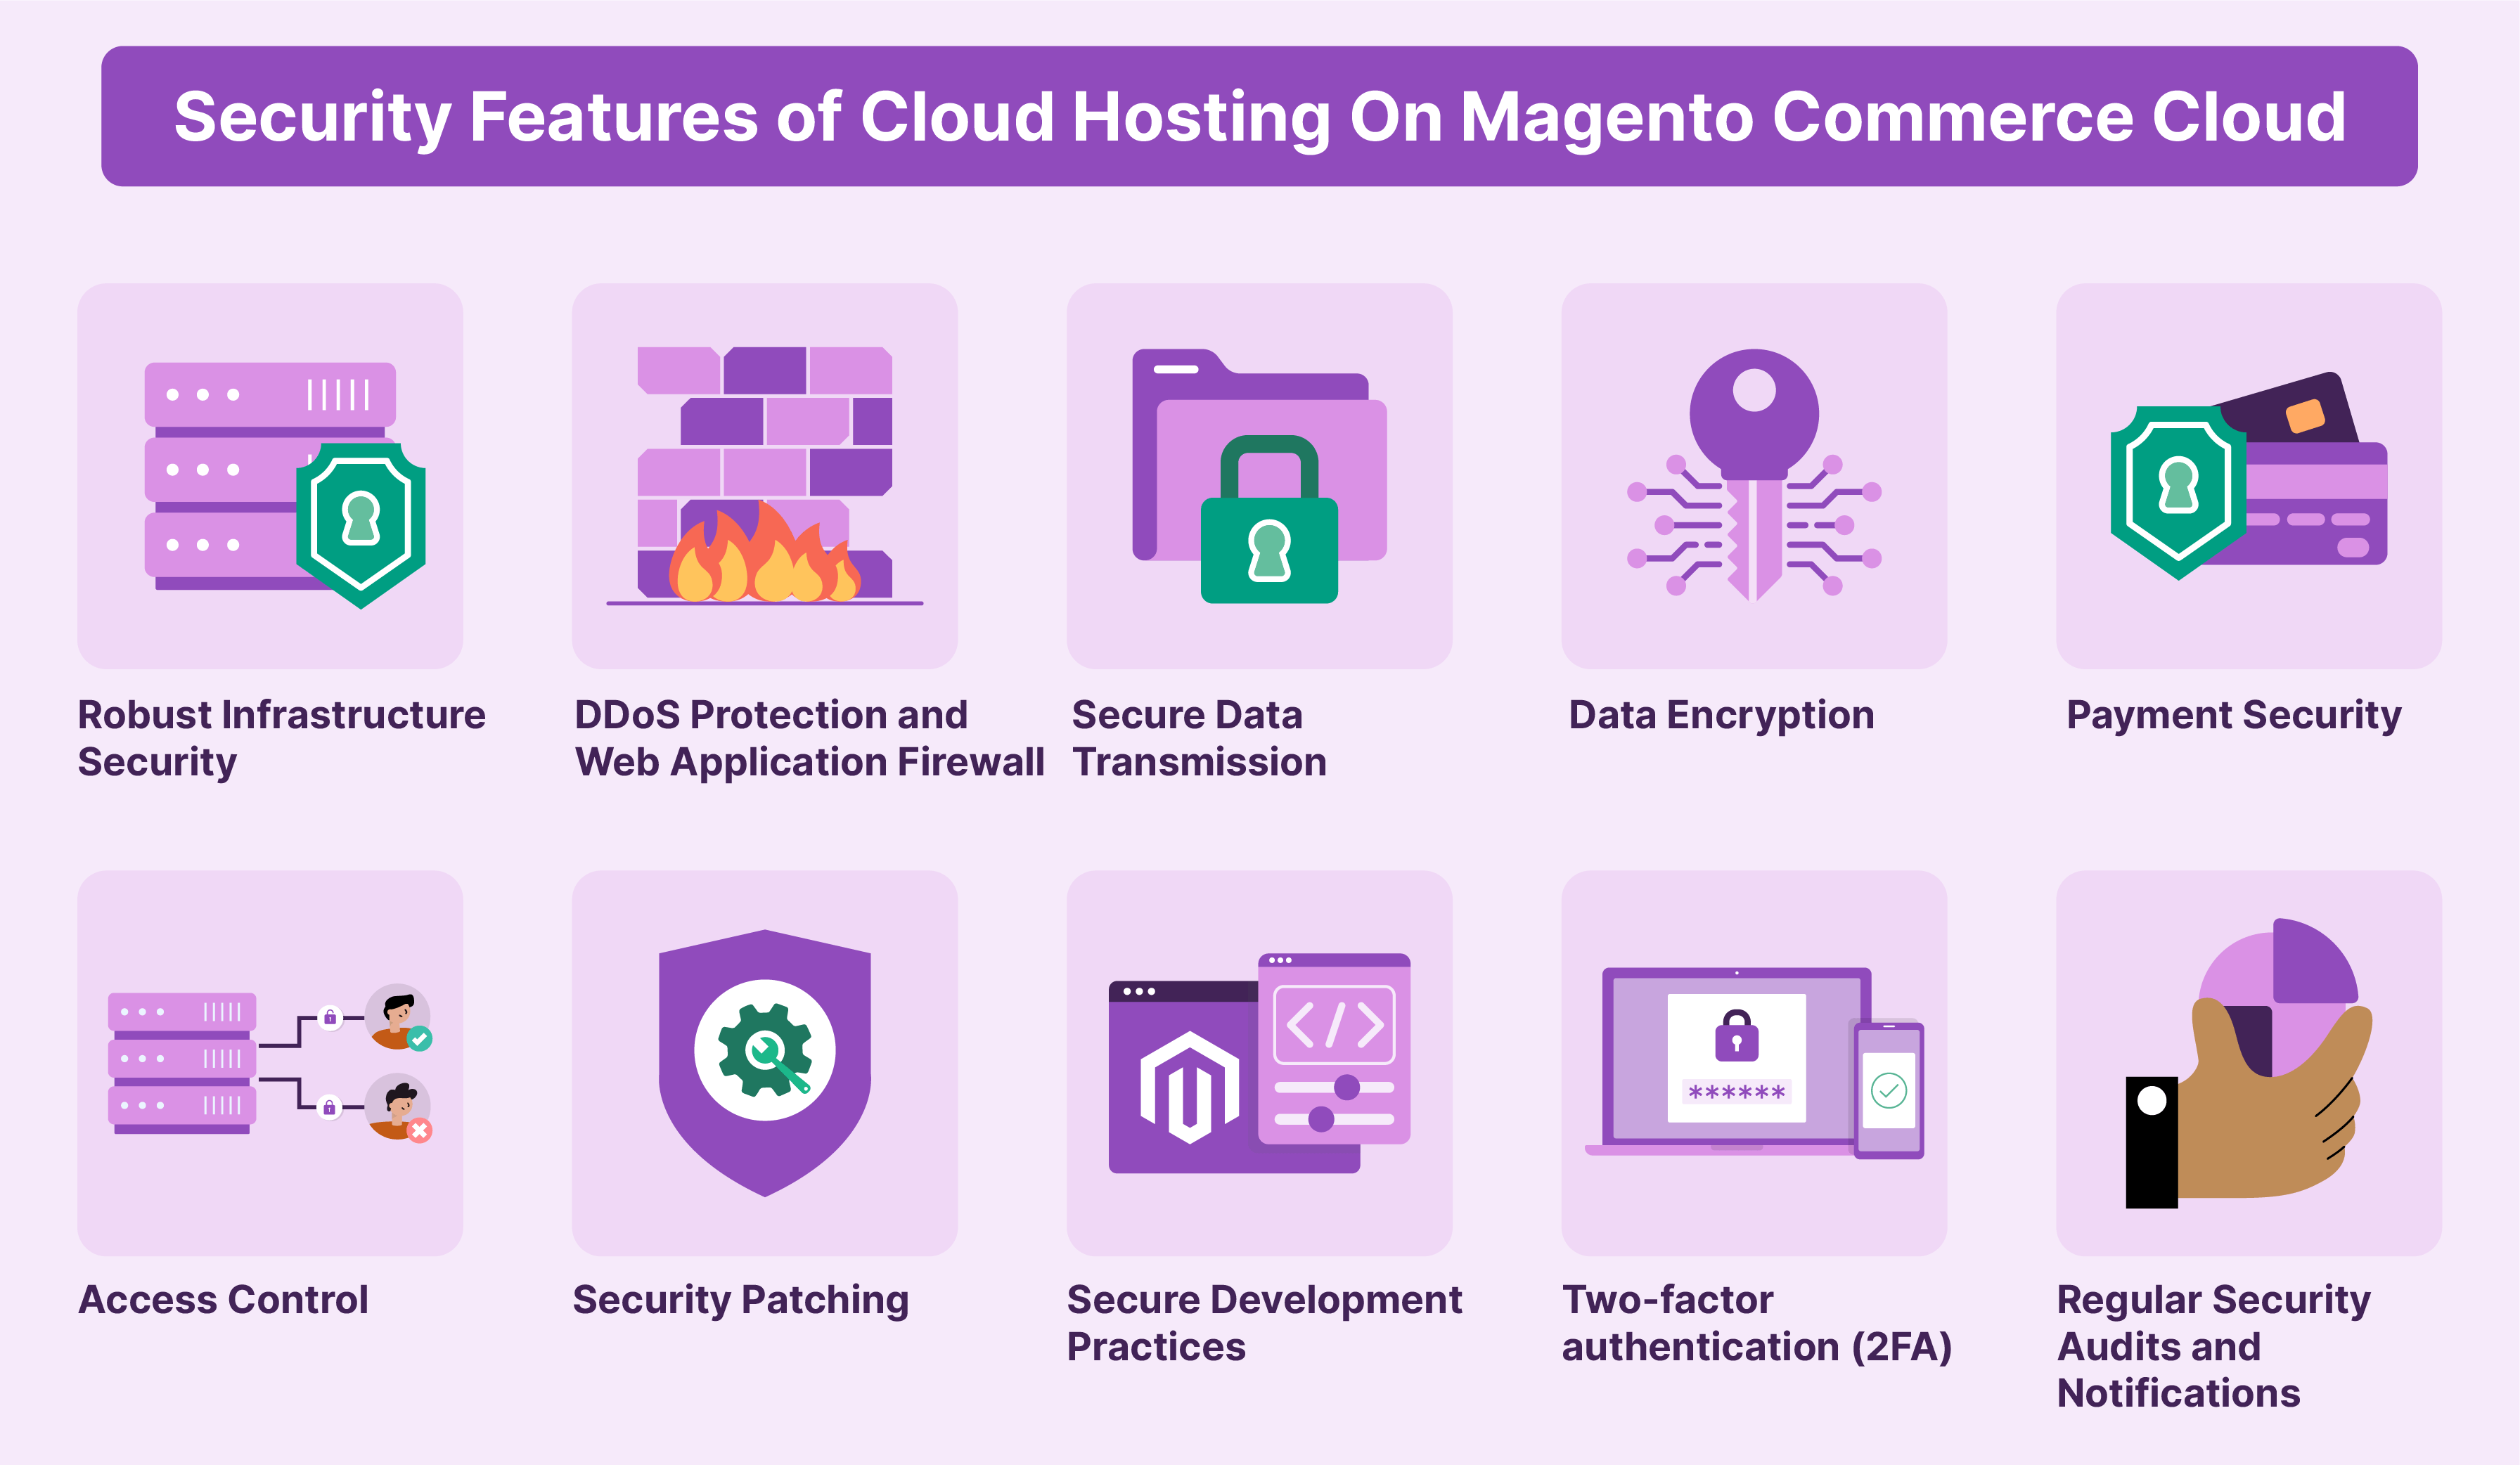 Overview of security features in Magento Commerce Cloud Hosting.